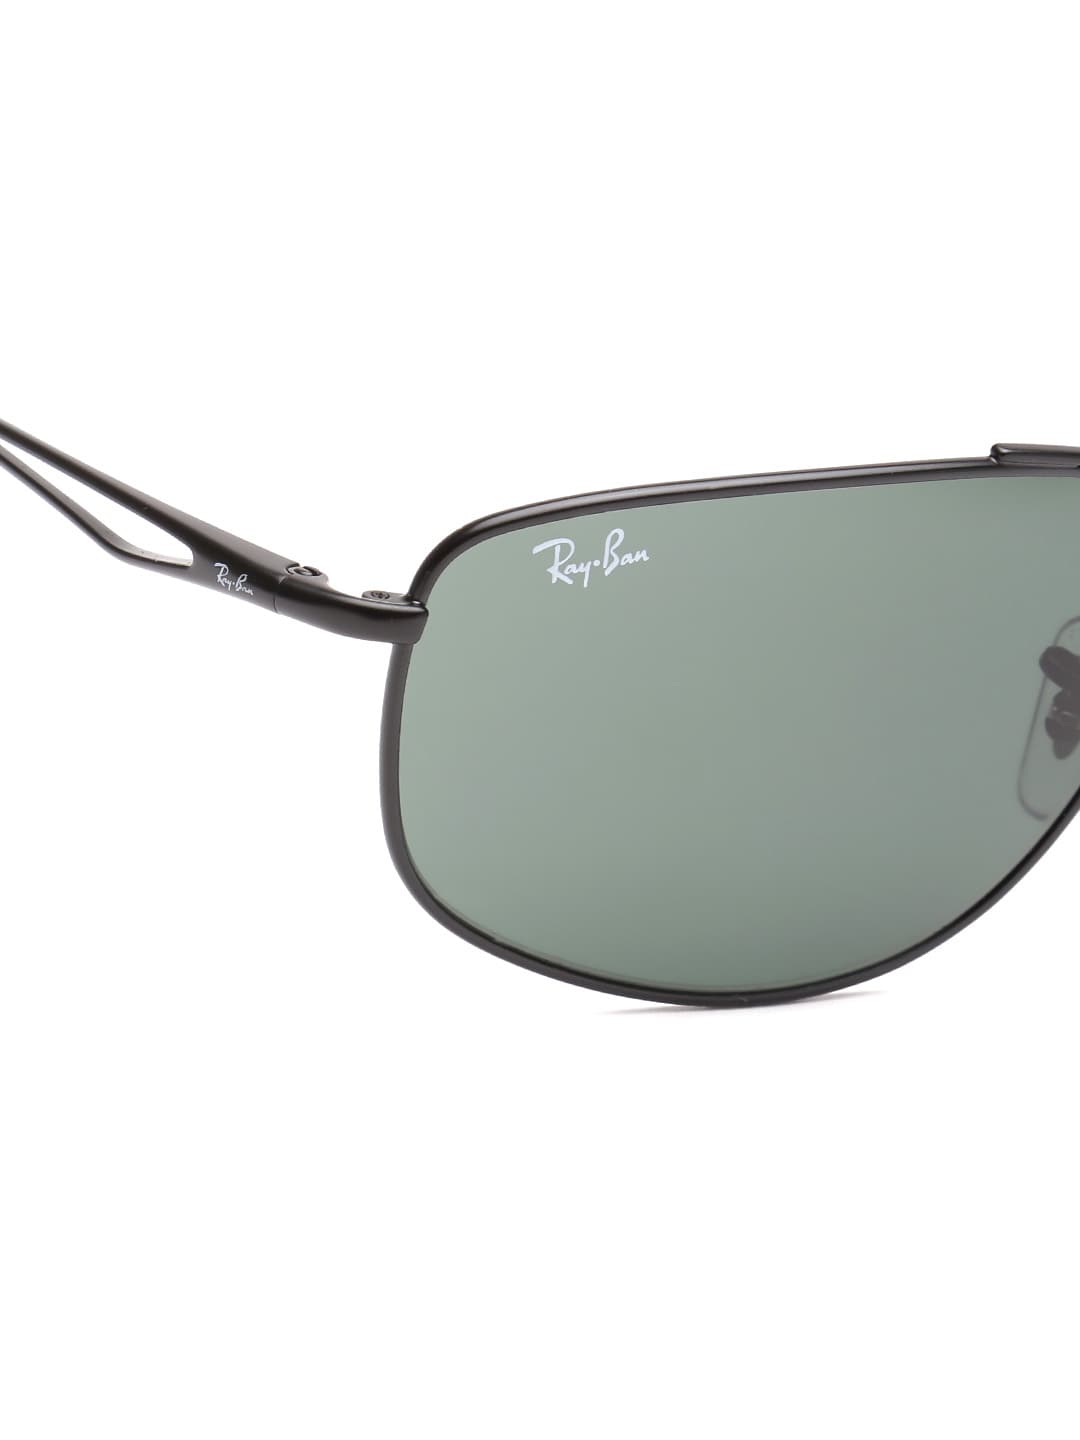 How To Identify Original Ray Ban Glasses